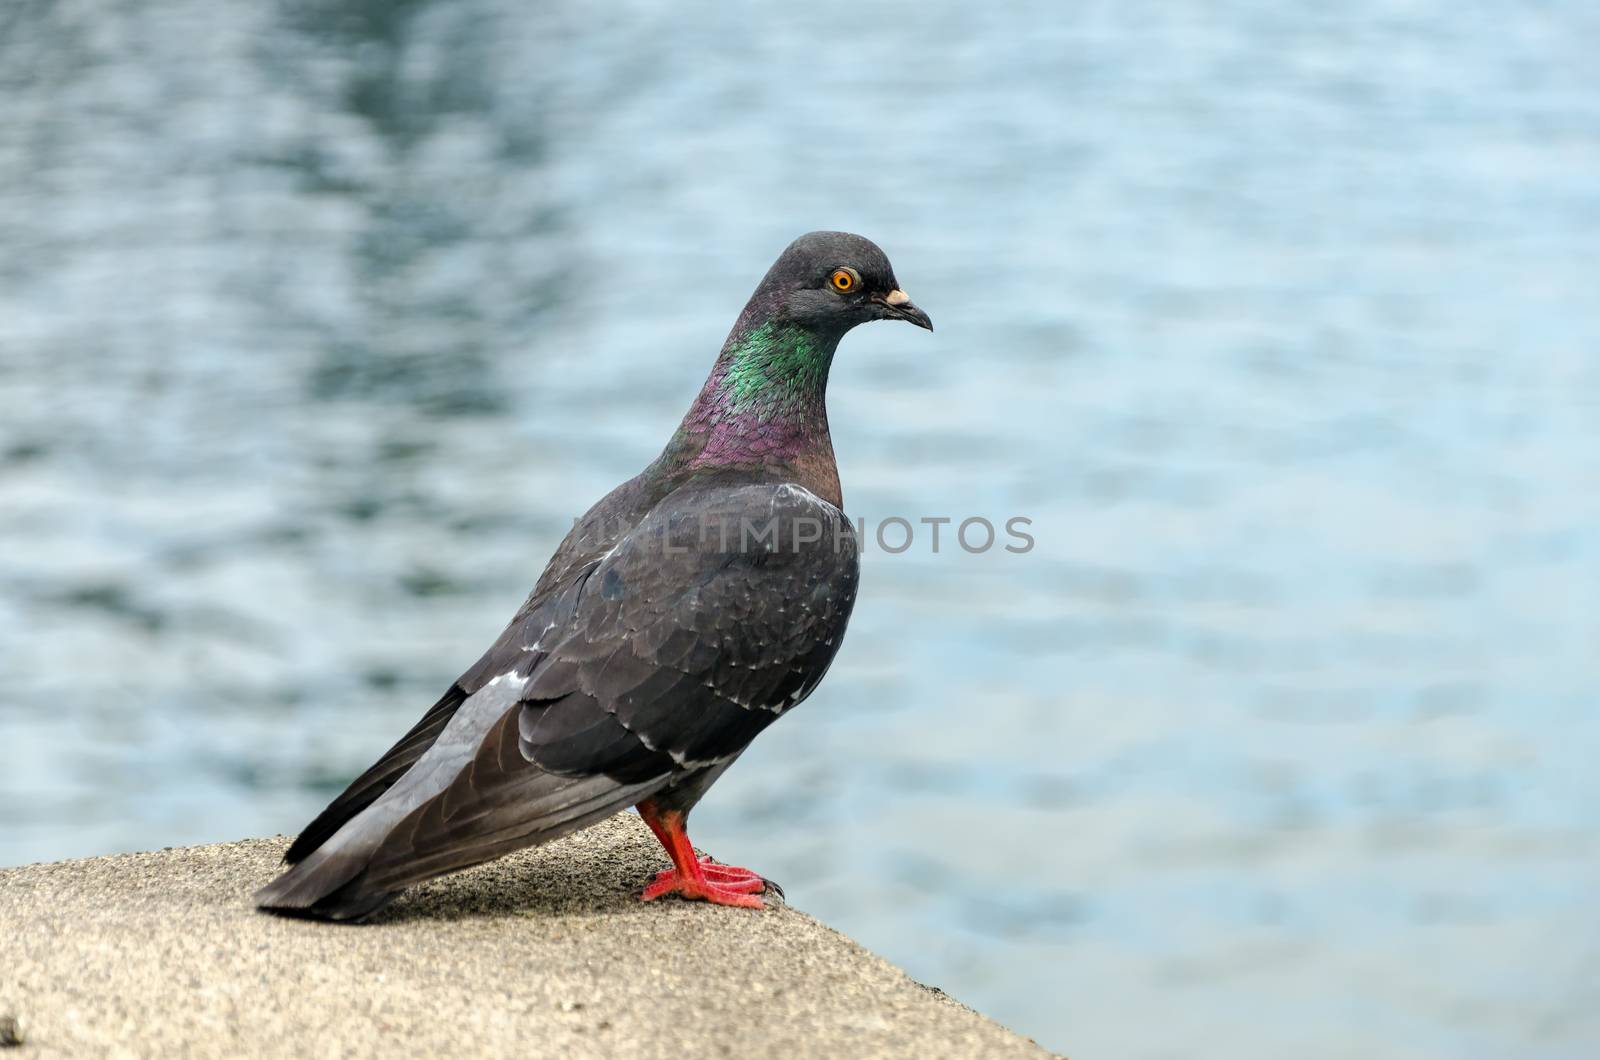 Pigeon and Water by jkraft5